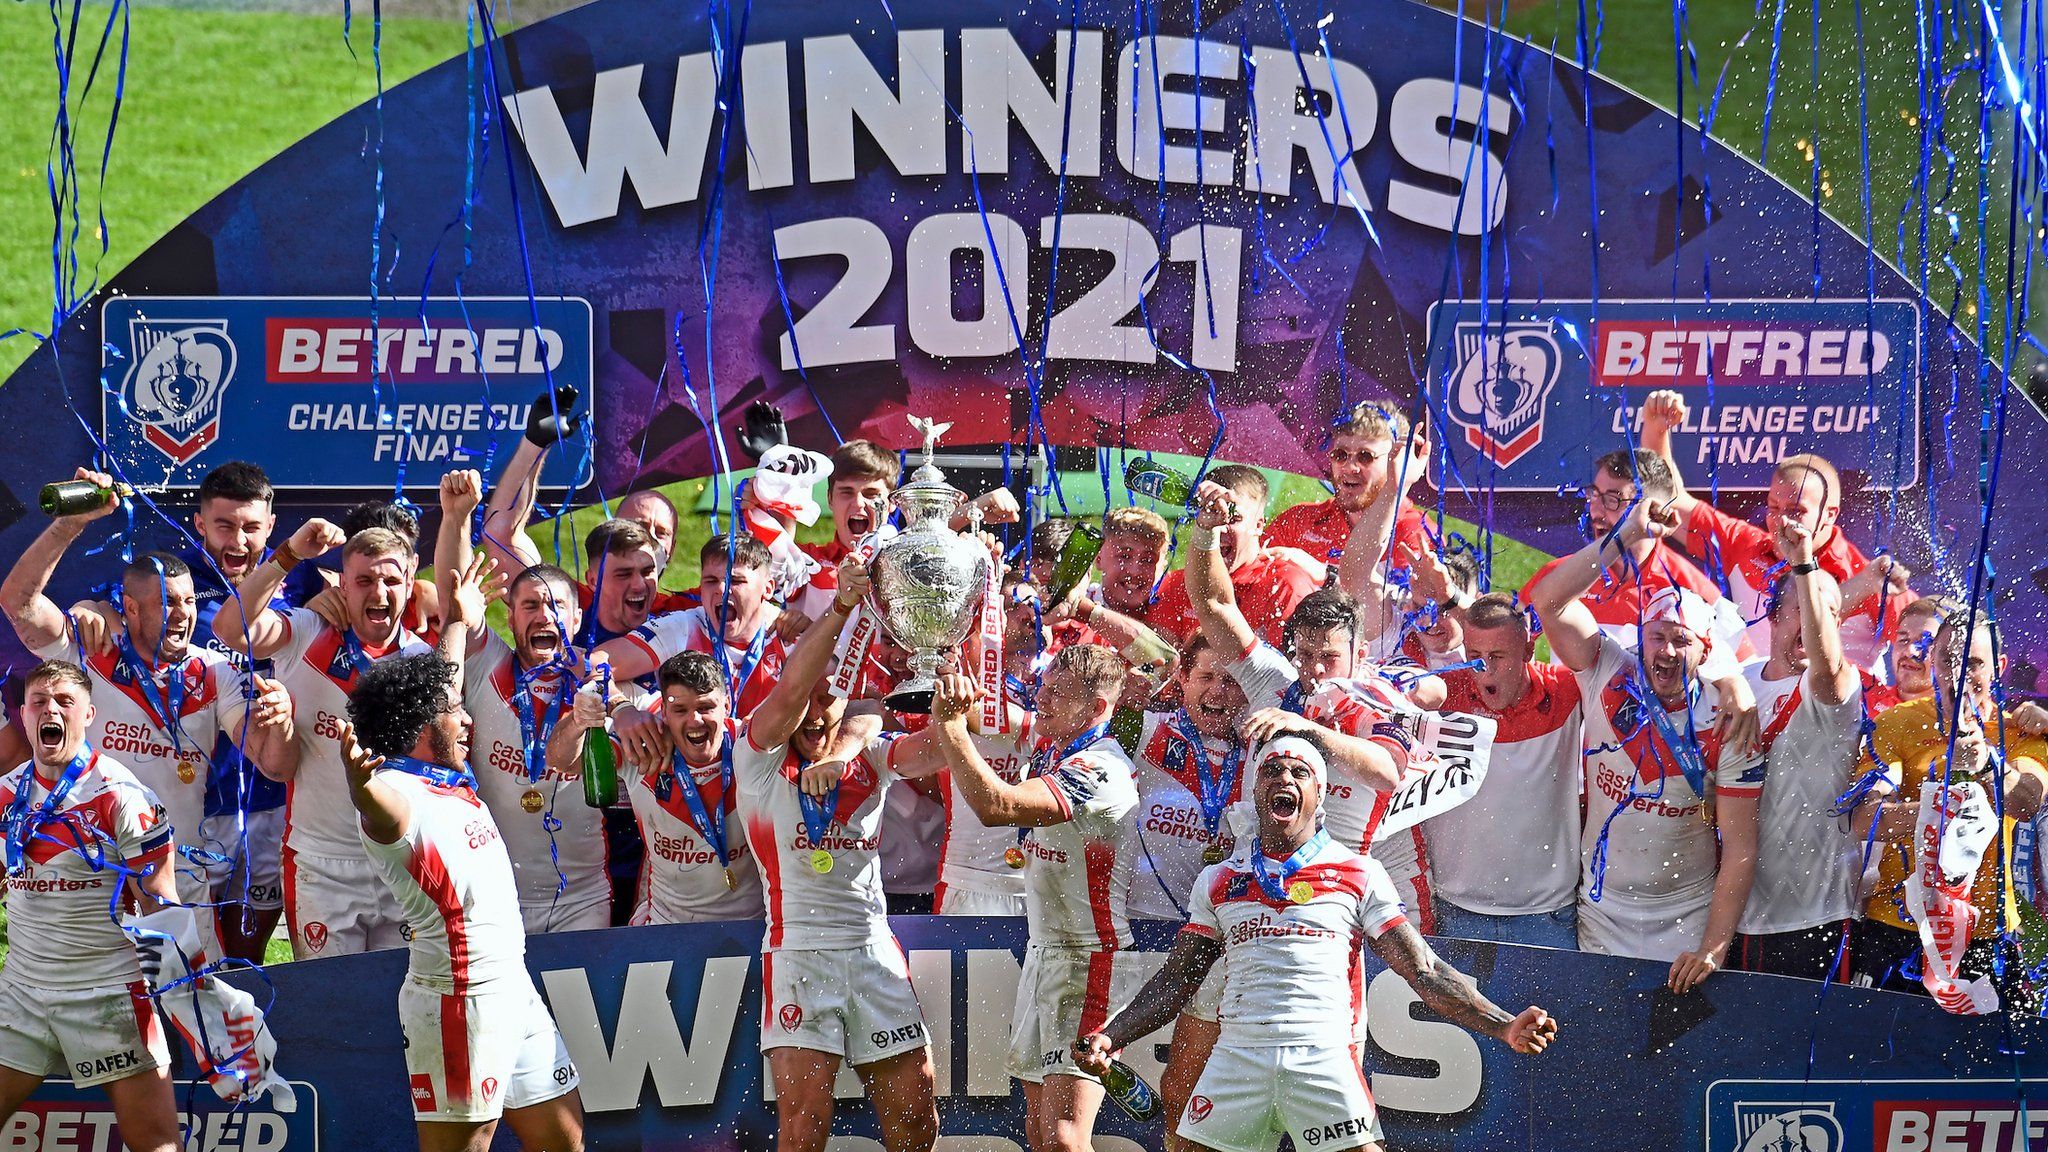 St Helens' 13th Challenge Cup triumph was also their first in 13 years